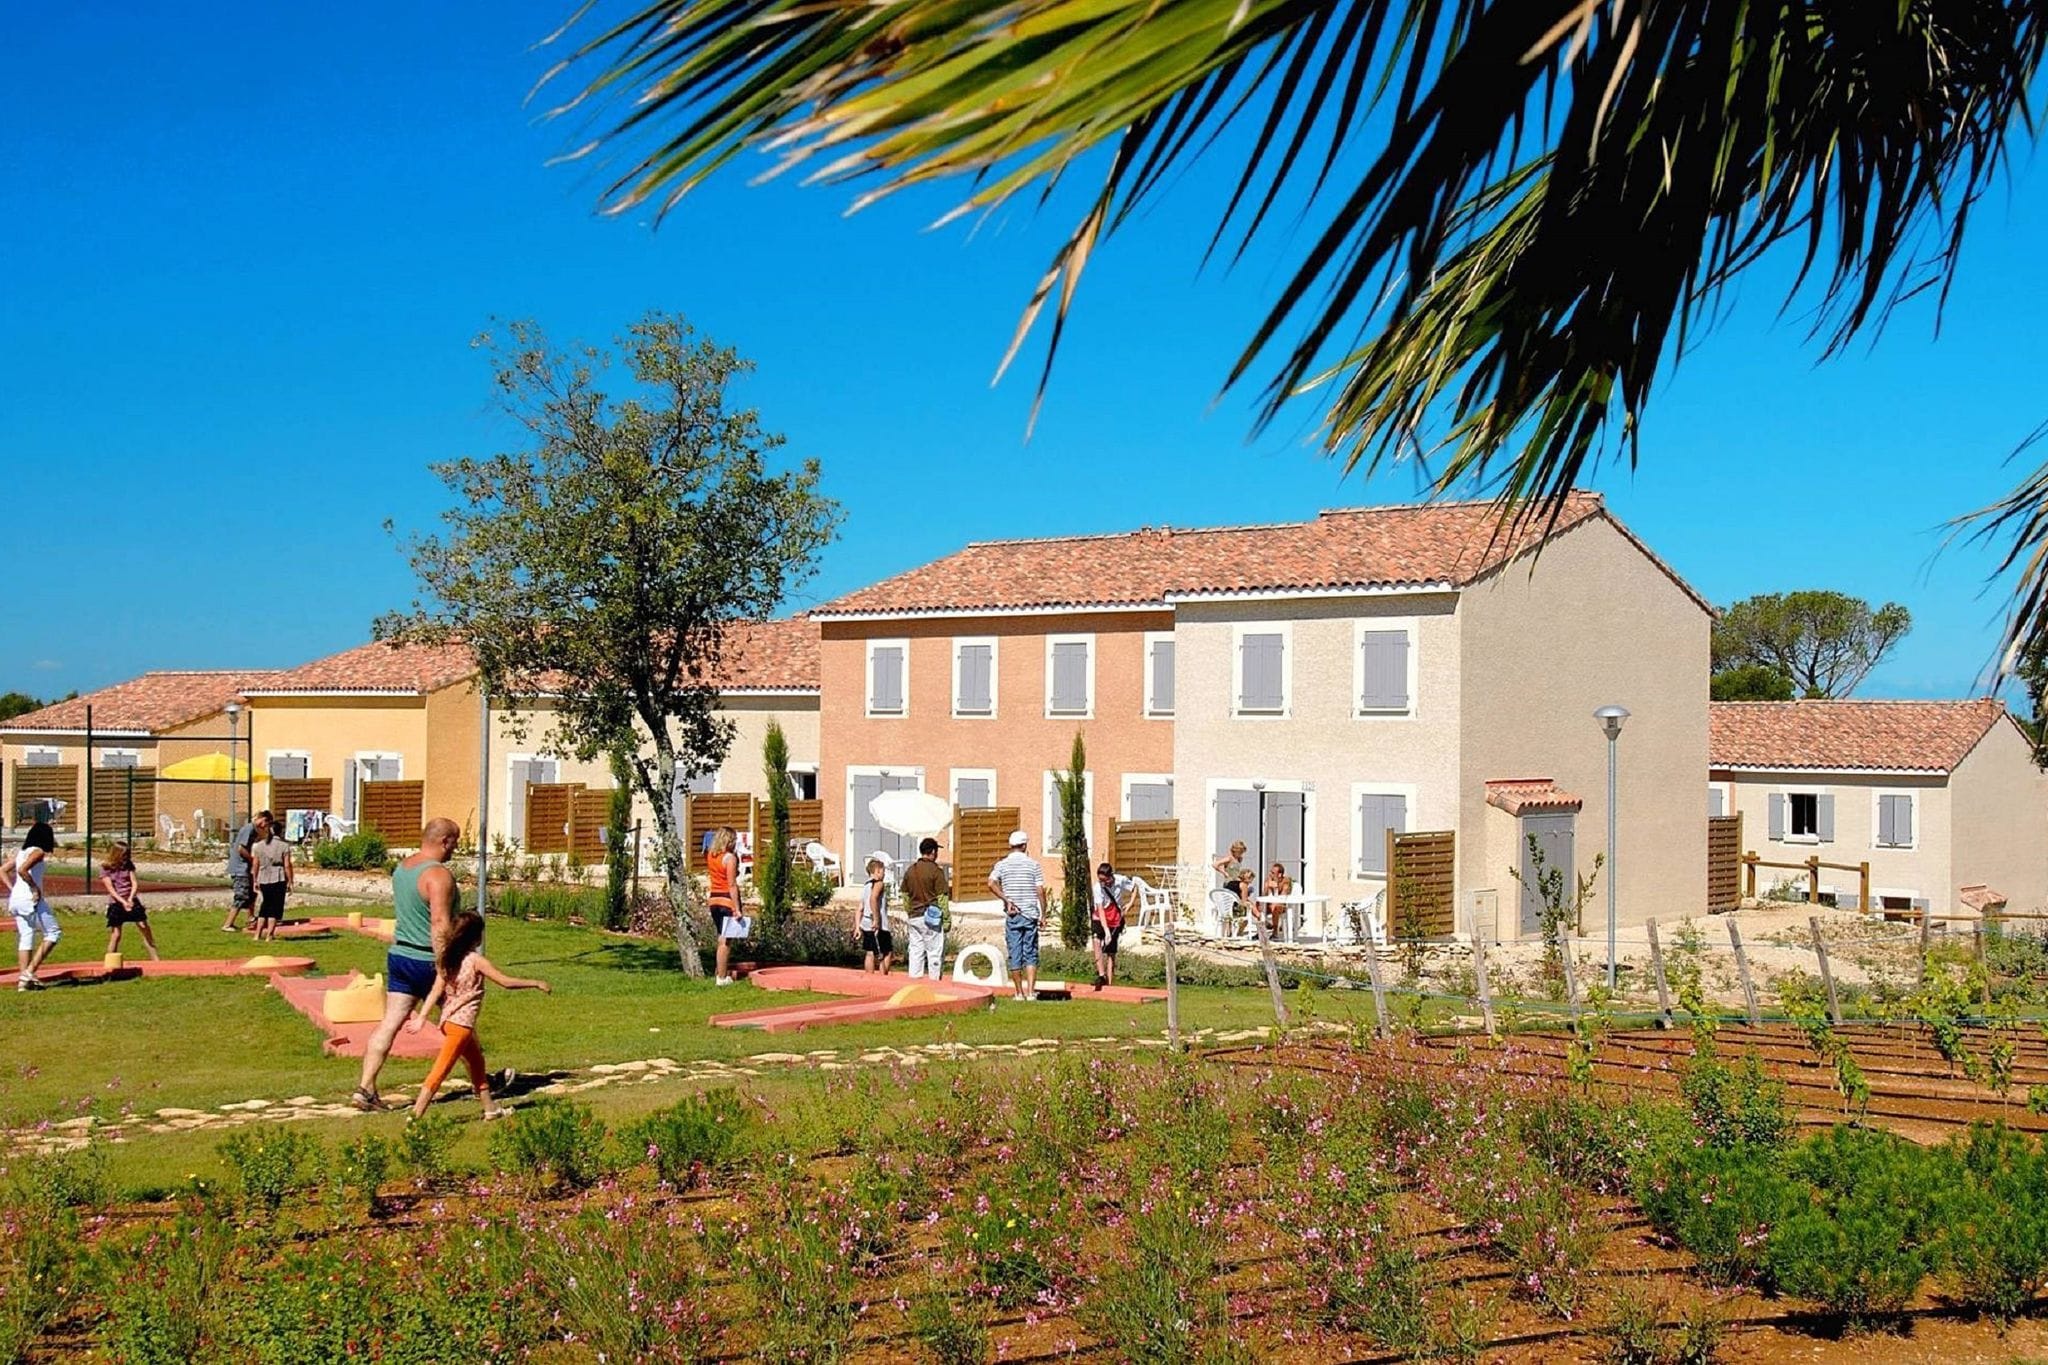 Well-kept holiday home between Nimes and Montpellier